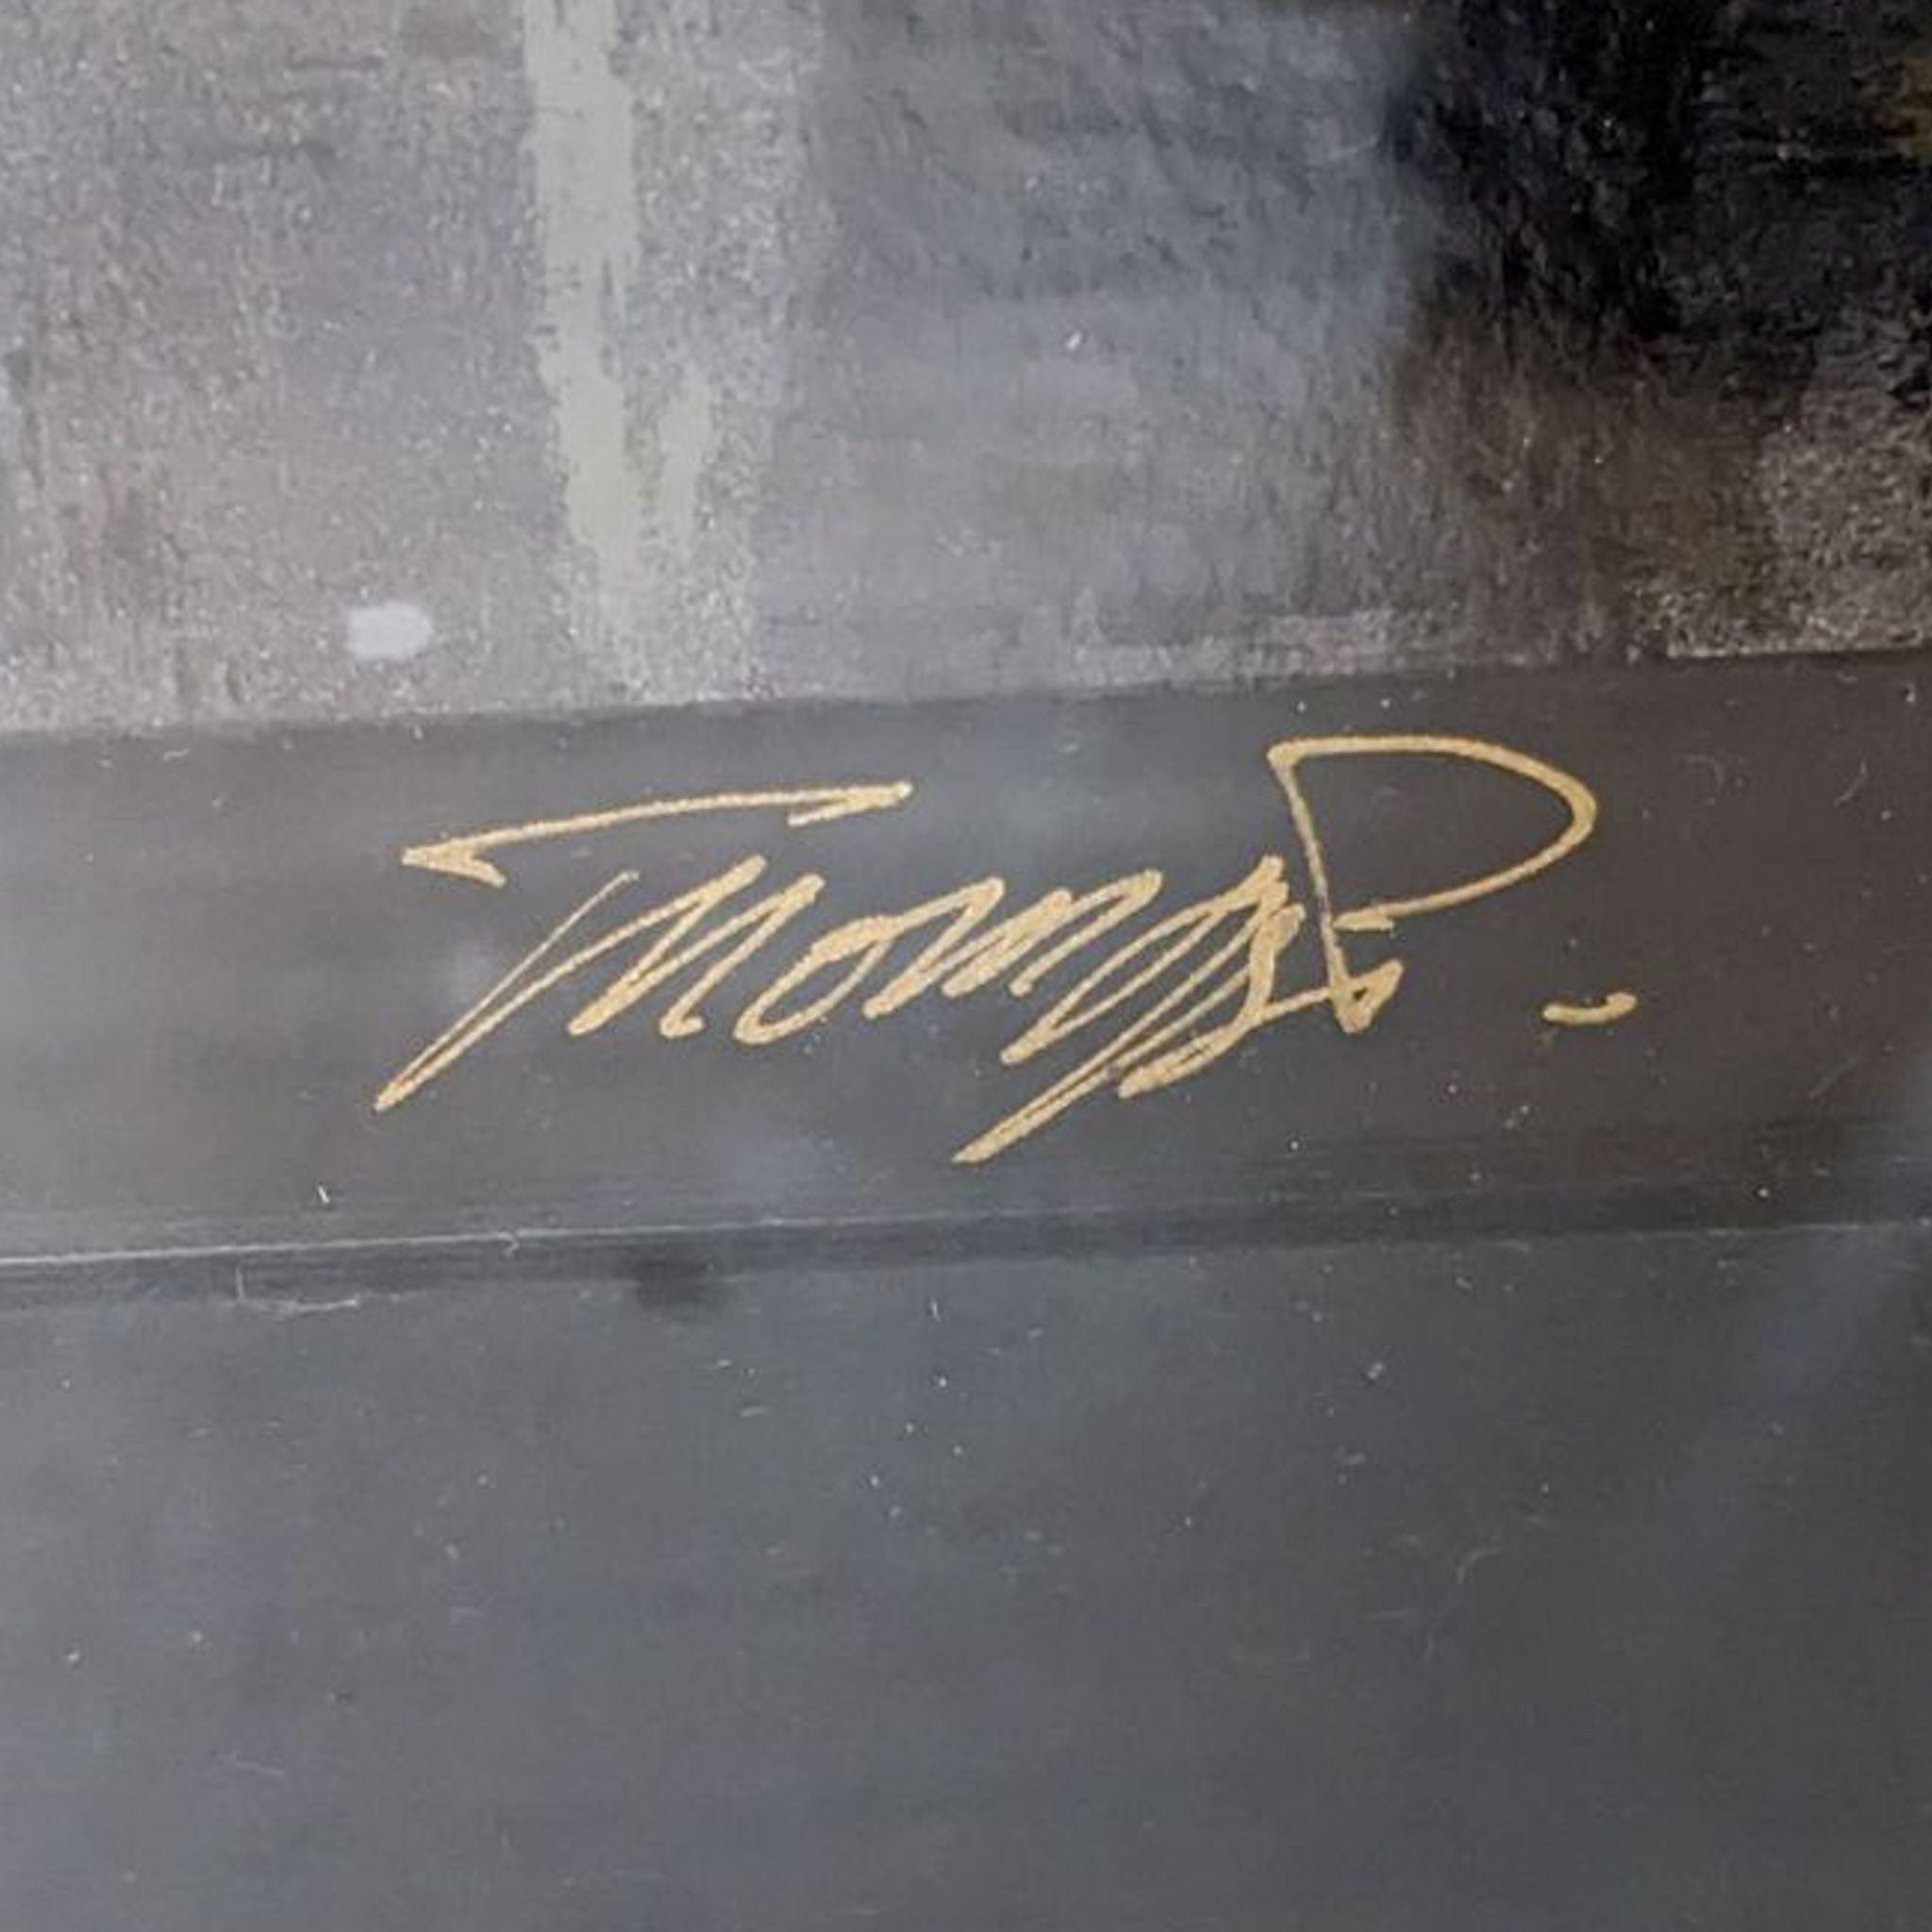 Alt text 2: "Close-up of artist's signature, 'Thomas P.', on a serigraph print from La Petites Suites Fenetre series by Reperch."